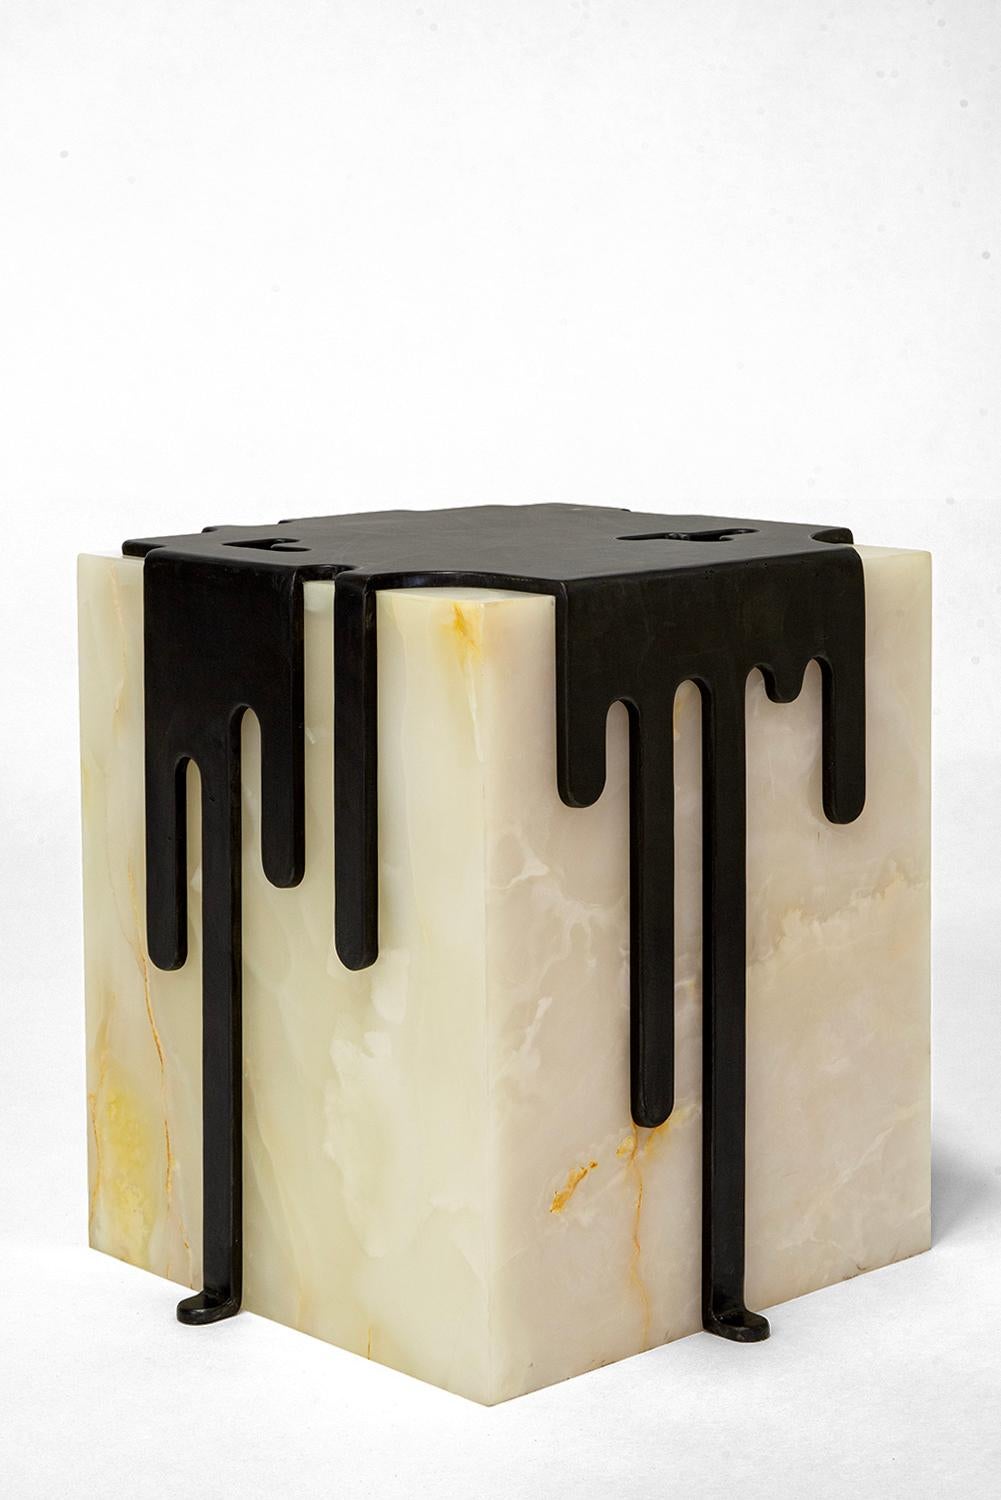 Table No. 17 
J.M. Szymanski
d. 2023
 
Imagine melting ice cream on a hot summer’s eve. These table sculptures represent joy and celebration. Each unique slab of onyx is carefully hand-picked. 3/8’’ thick solid blackened steel “drips” over the edges